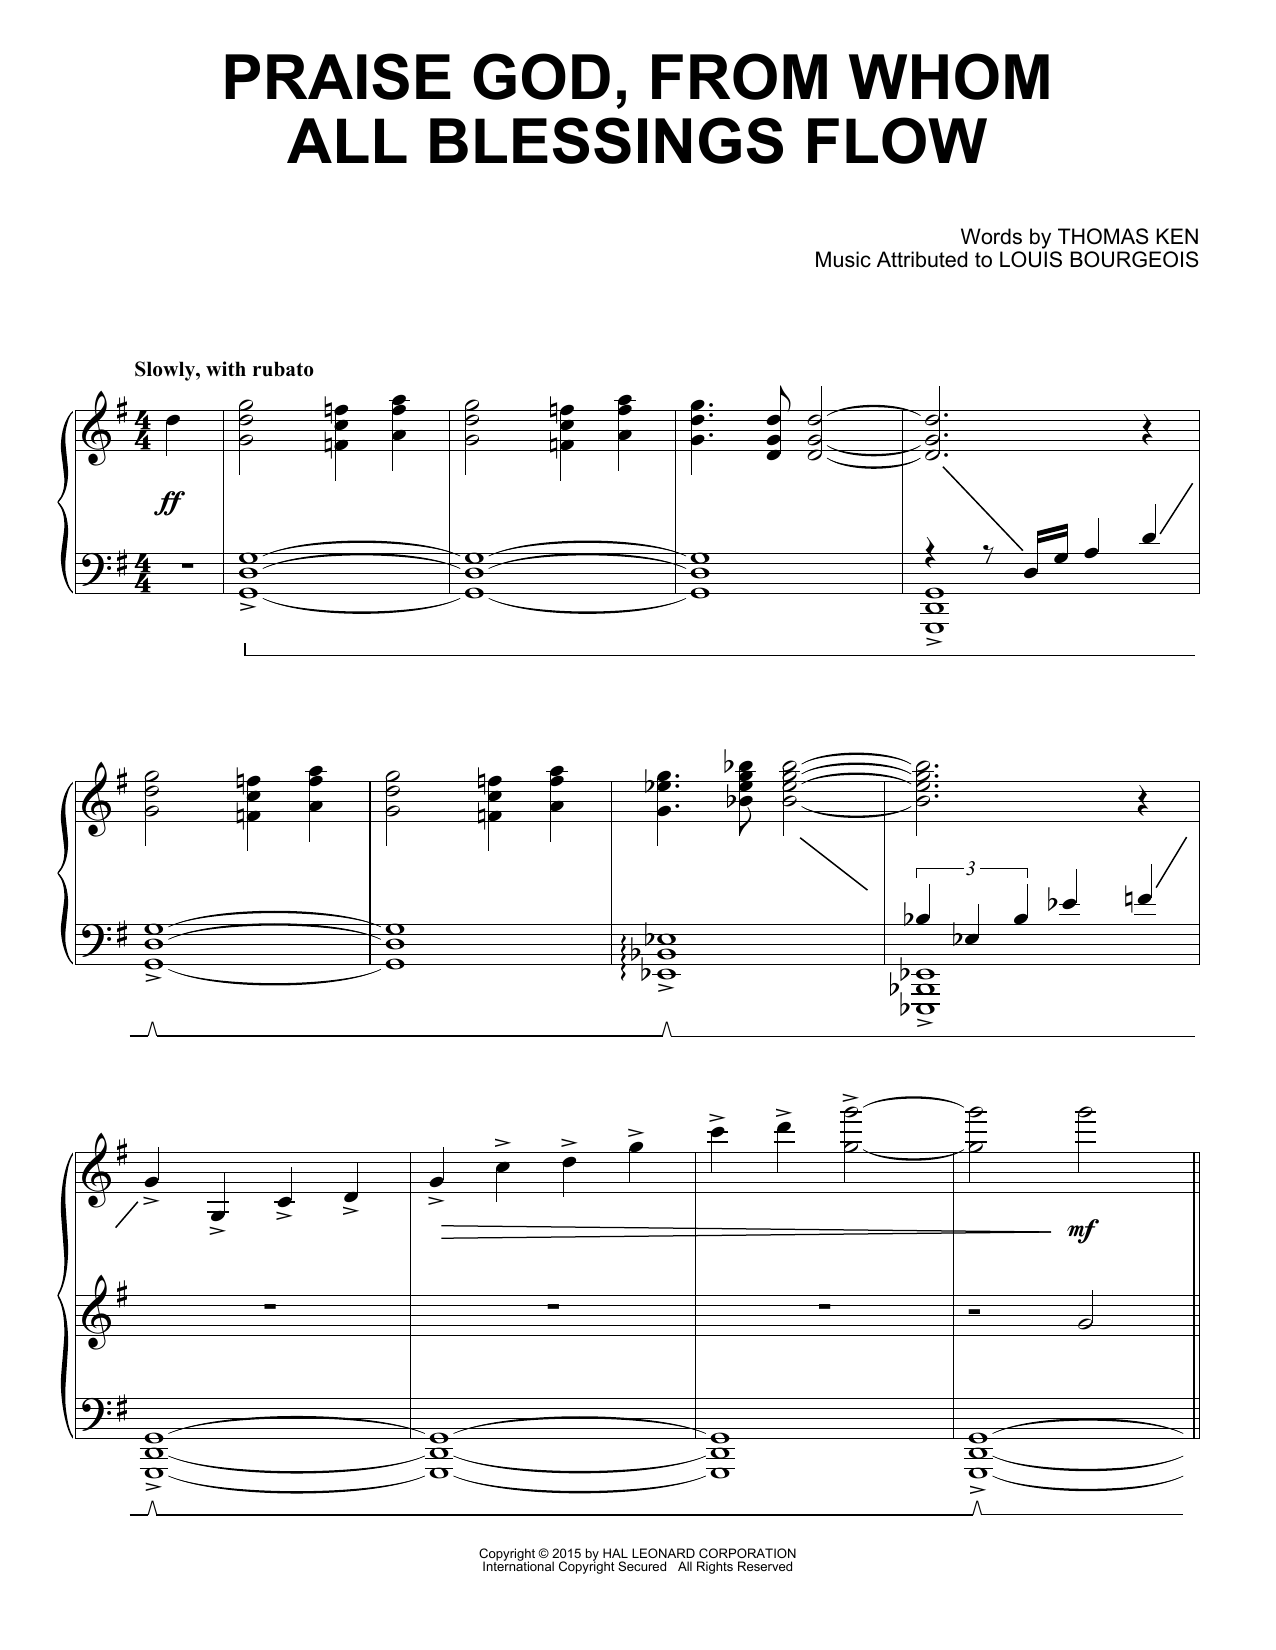 Download Thomas Ken Praise God, From Whom All Blessings Flo Sheet Music